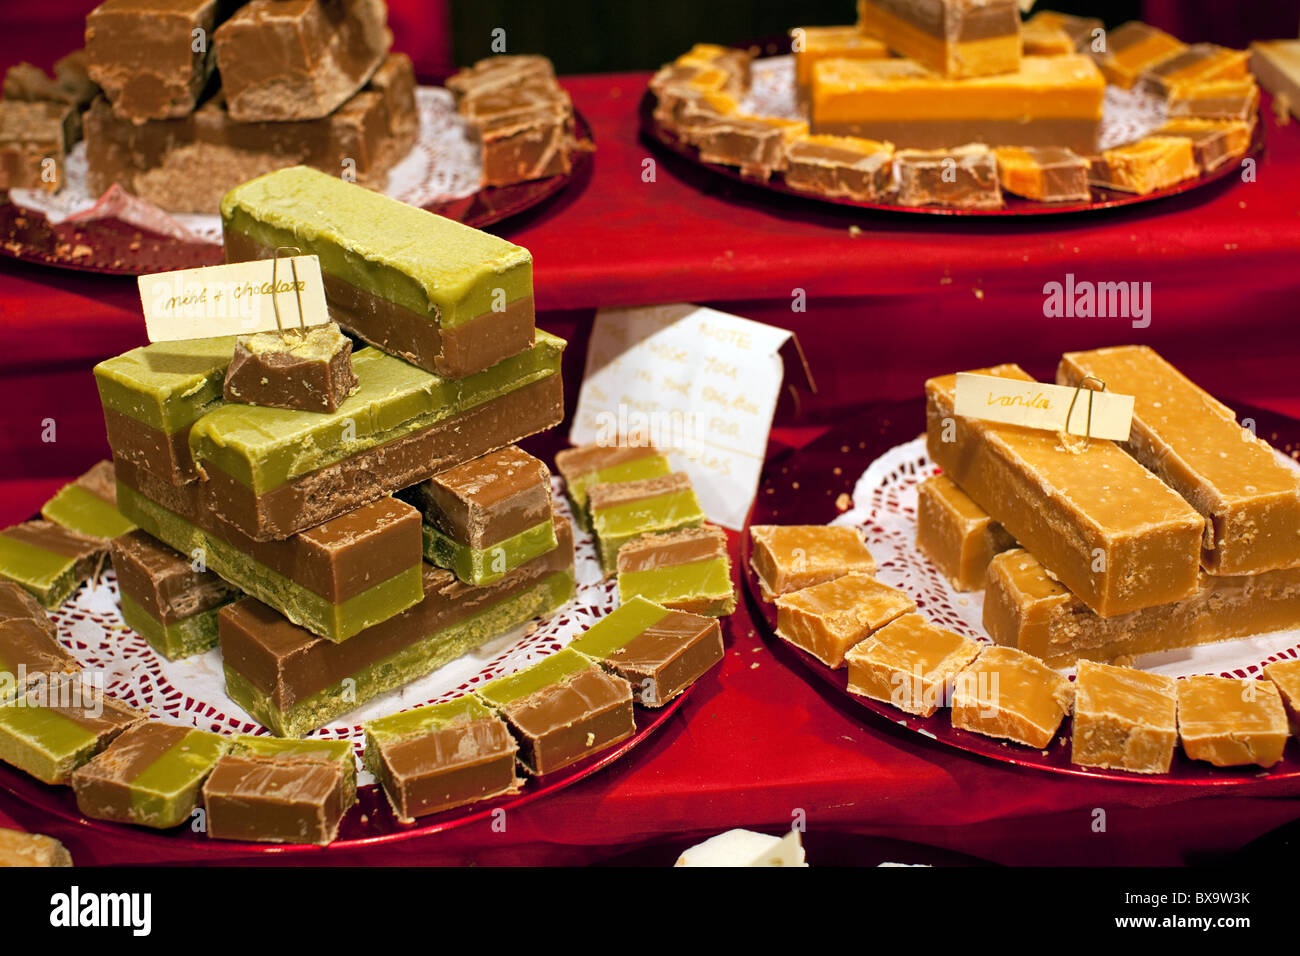 English-made fudge on sale at German Christmas market in London Stock Photo